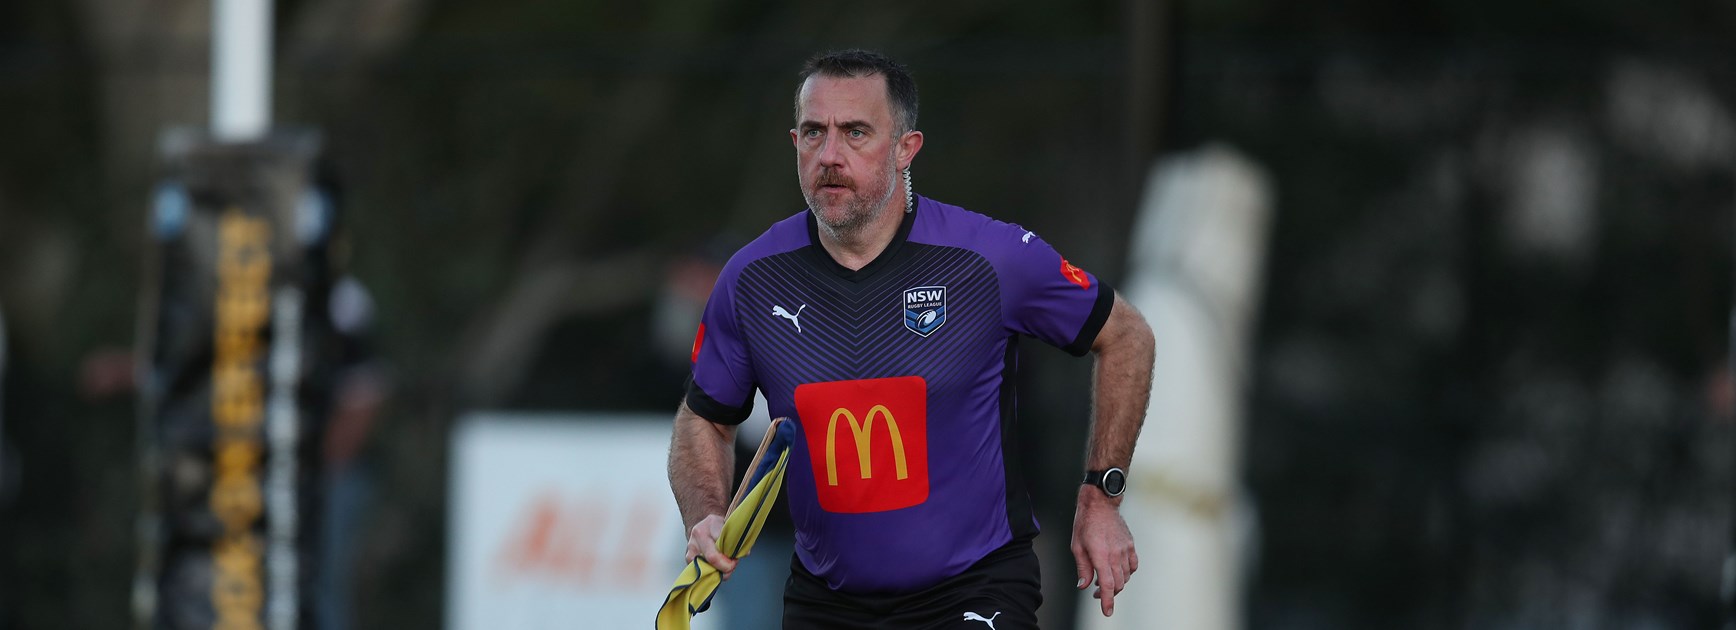 NSWRL official reaches 500 games